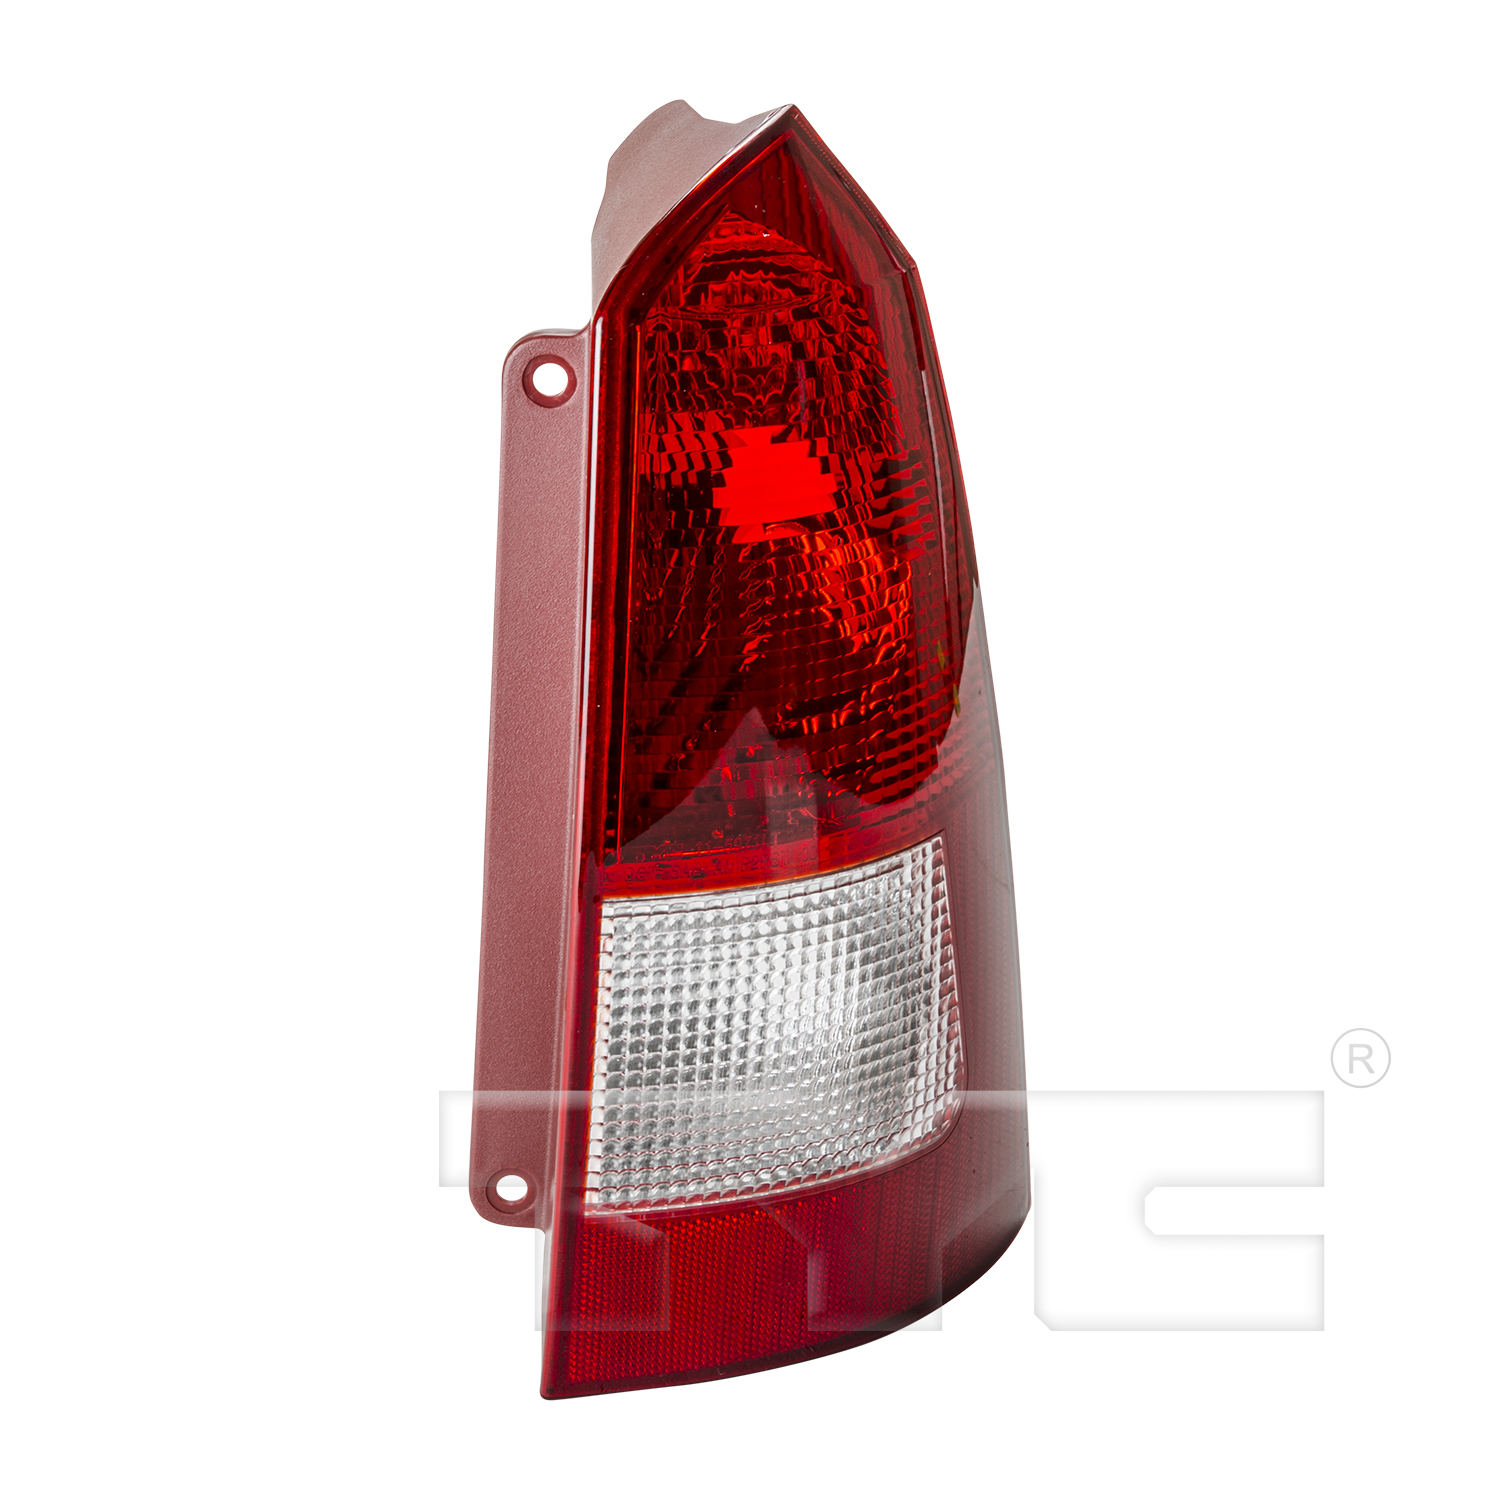 Aftermarket TAILLIGHTS for FORD - FOCUS, FOCUS,01-03,RT Taillamp assy